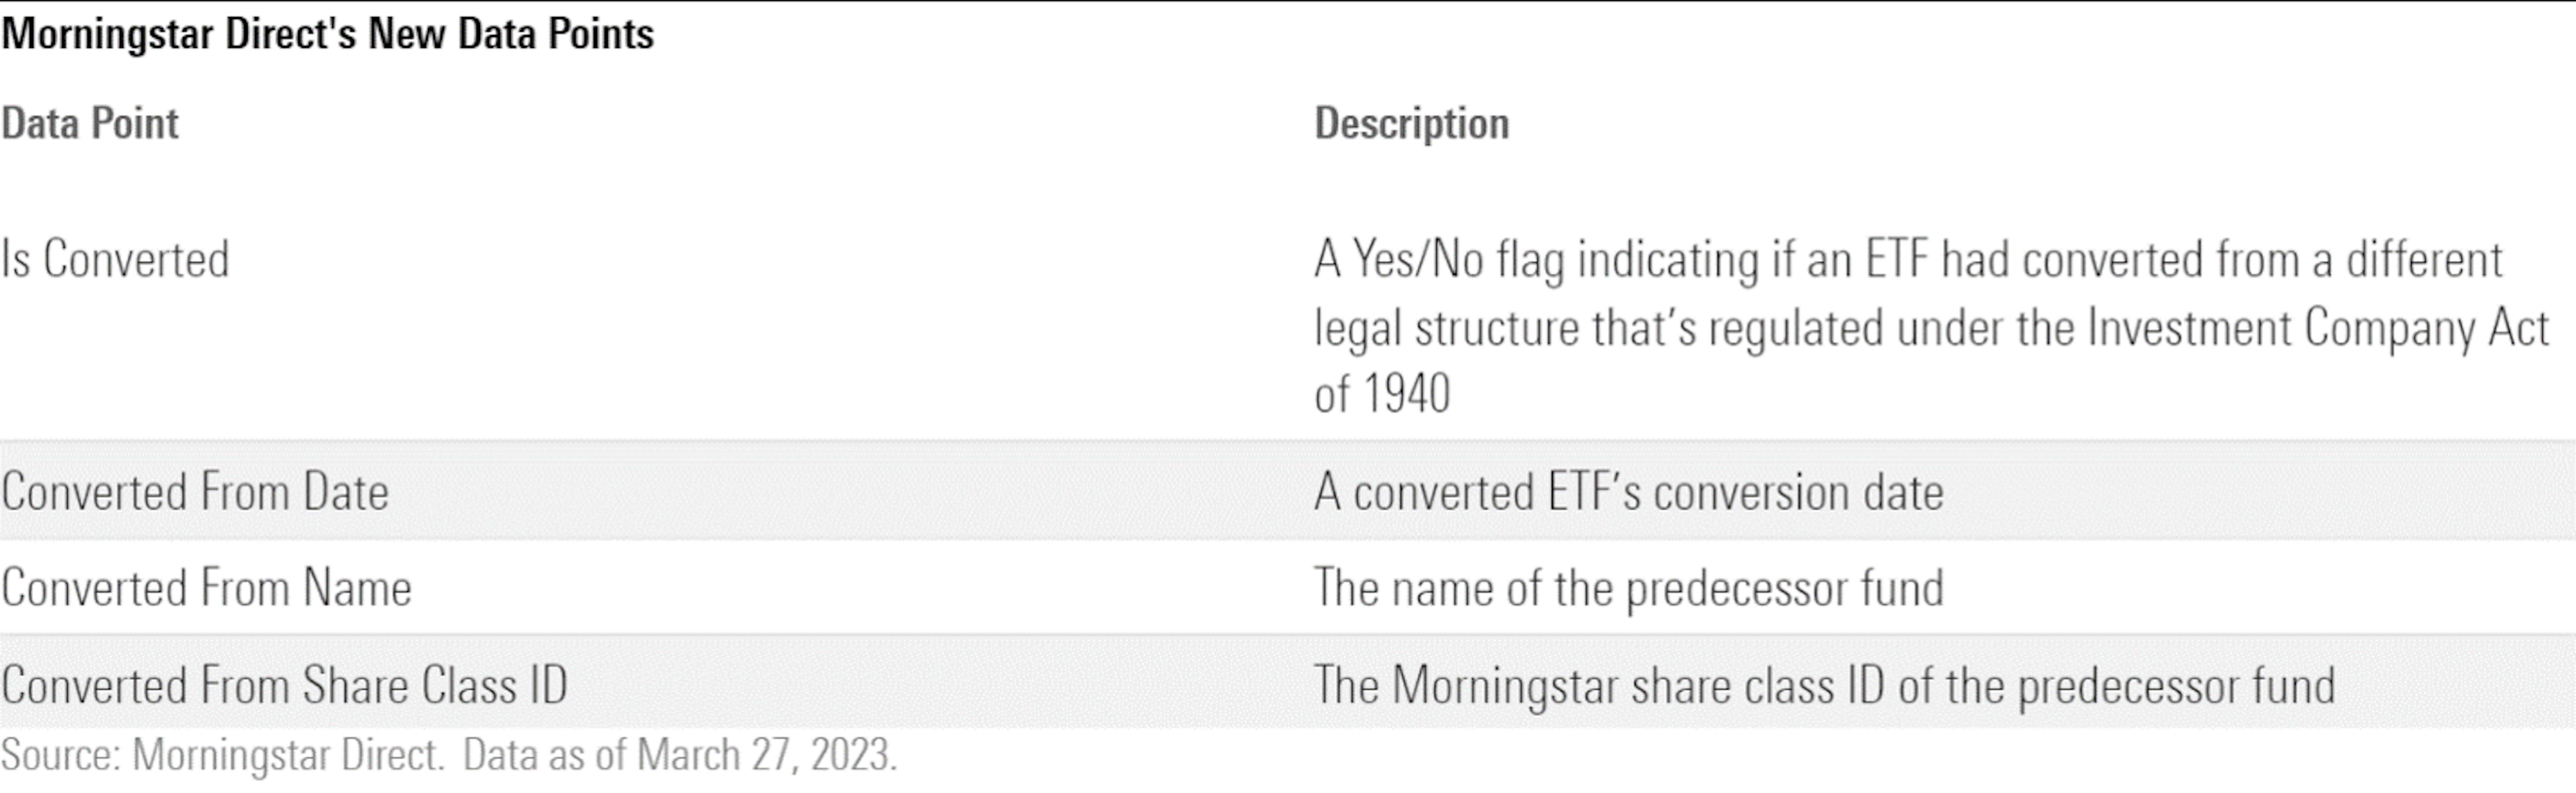 Table listing Morningstar Direct's four new data points to identify mutual funds that have converted to ETFs